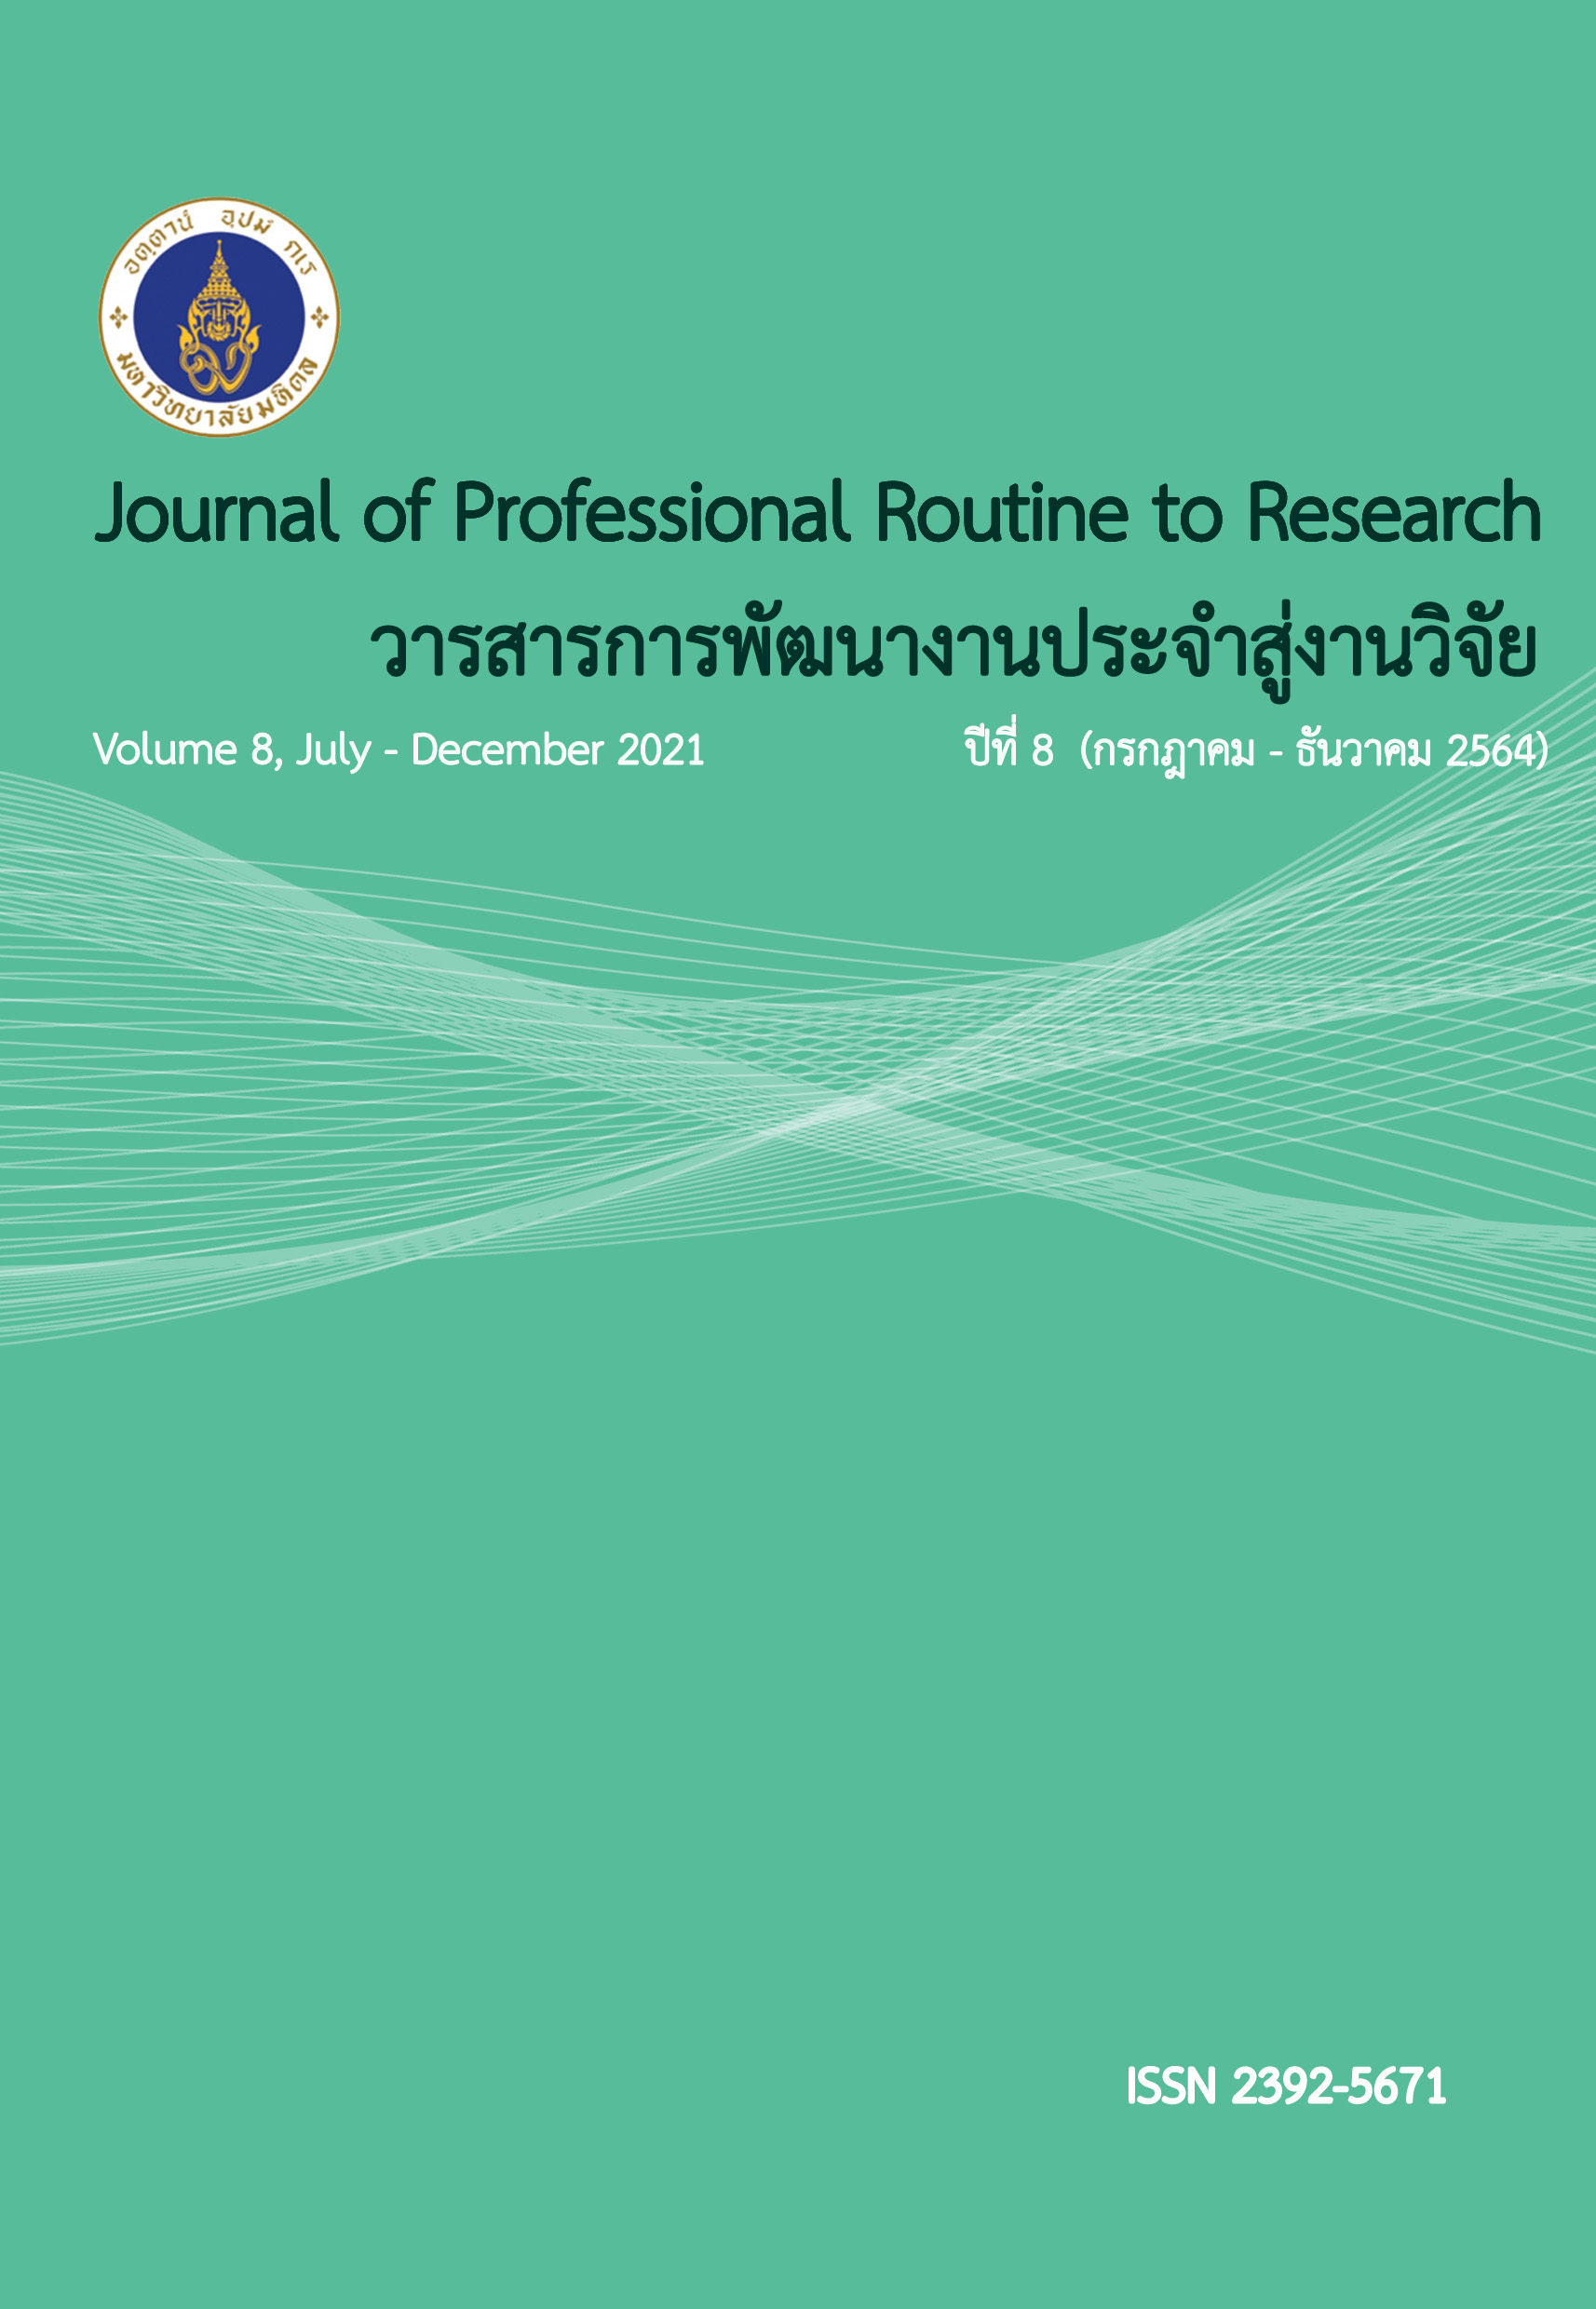 					View Vol. 8 No. 2 (2021): Journal of Professional Routine to Research (JPR2R)
				